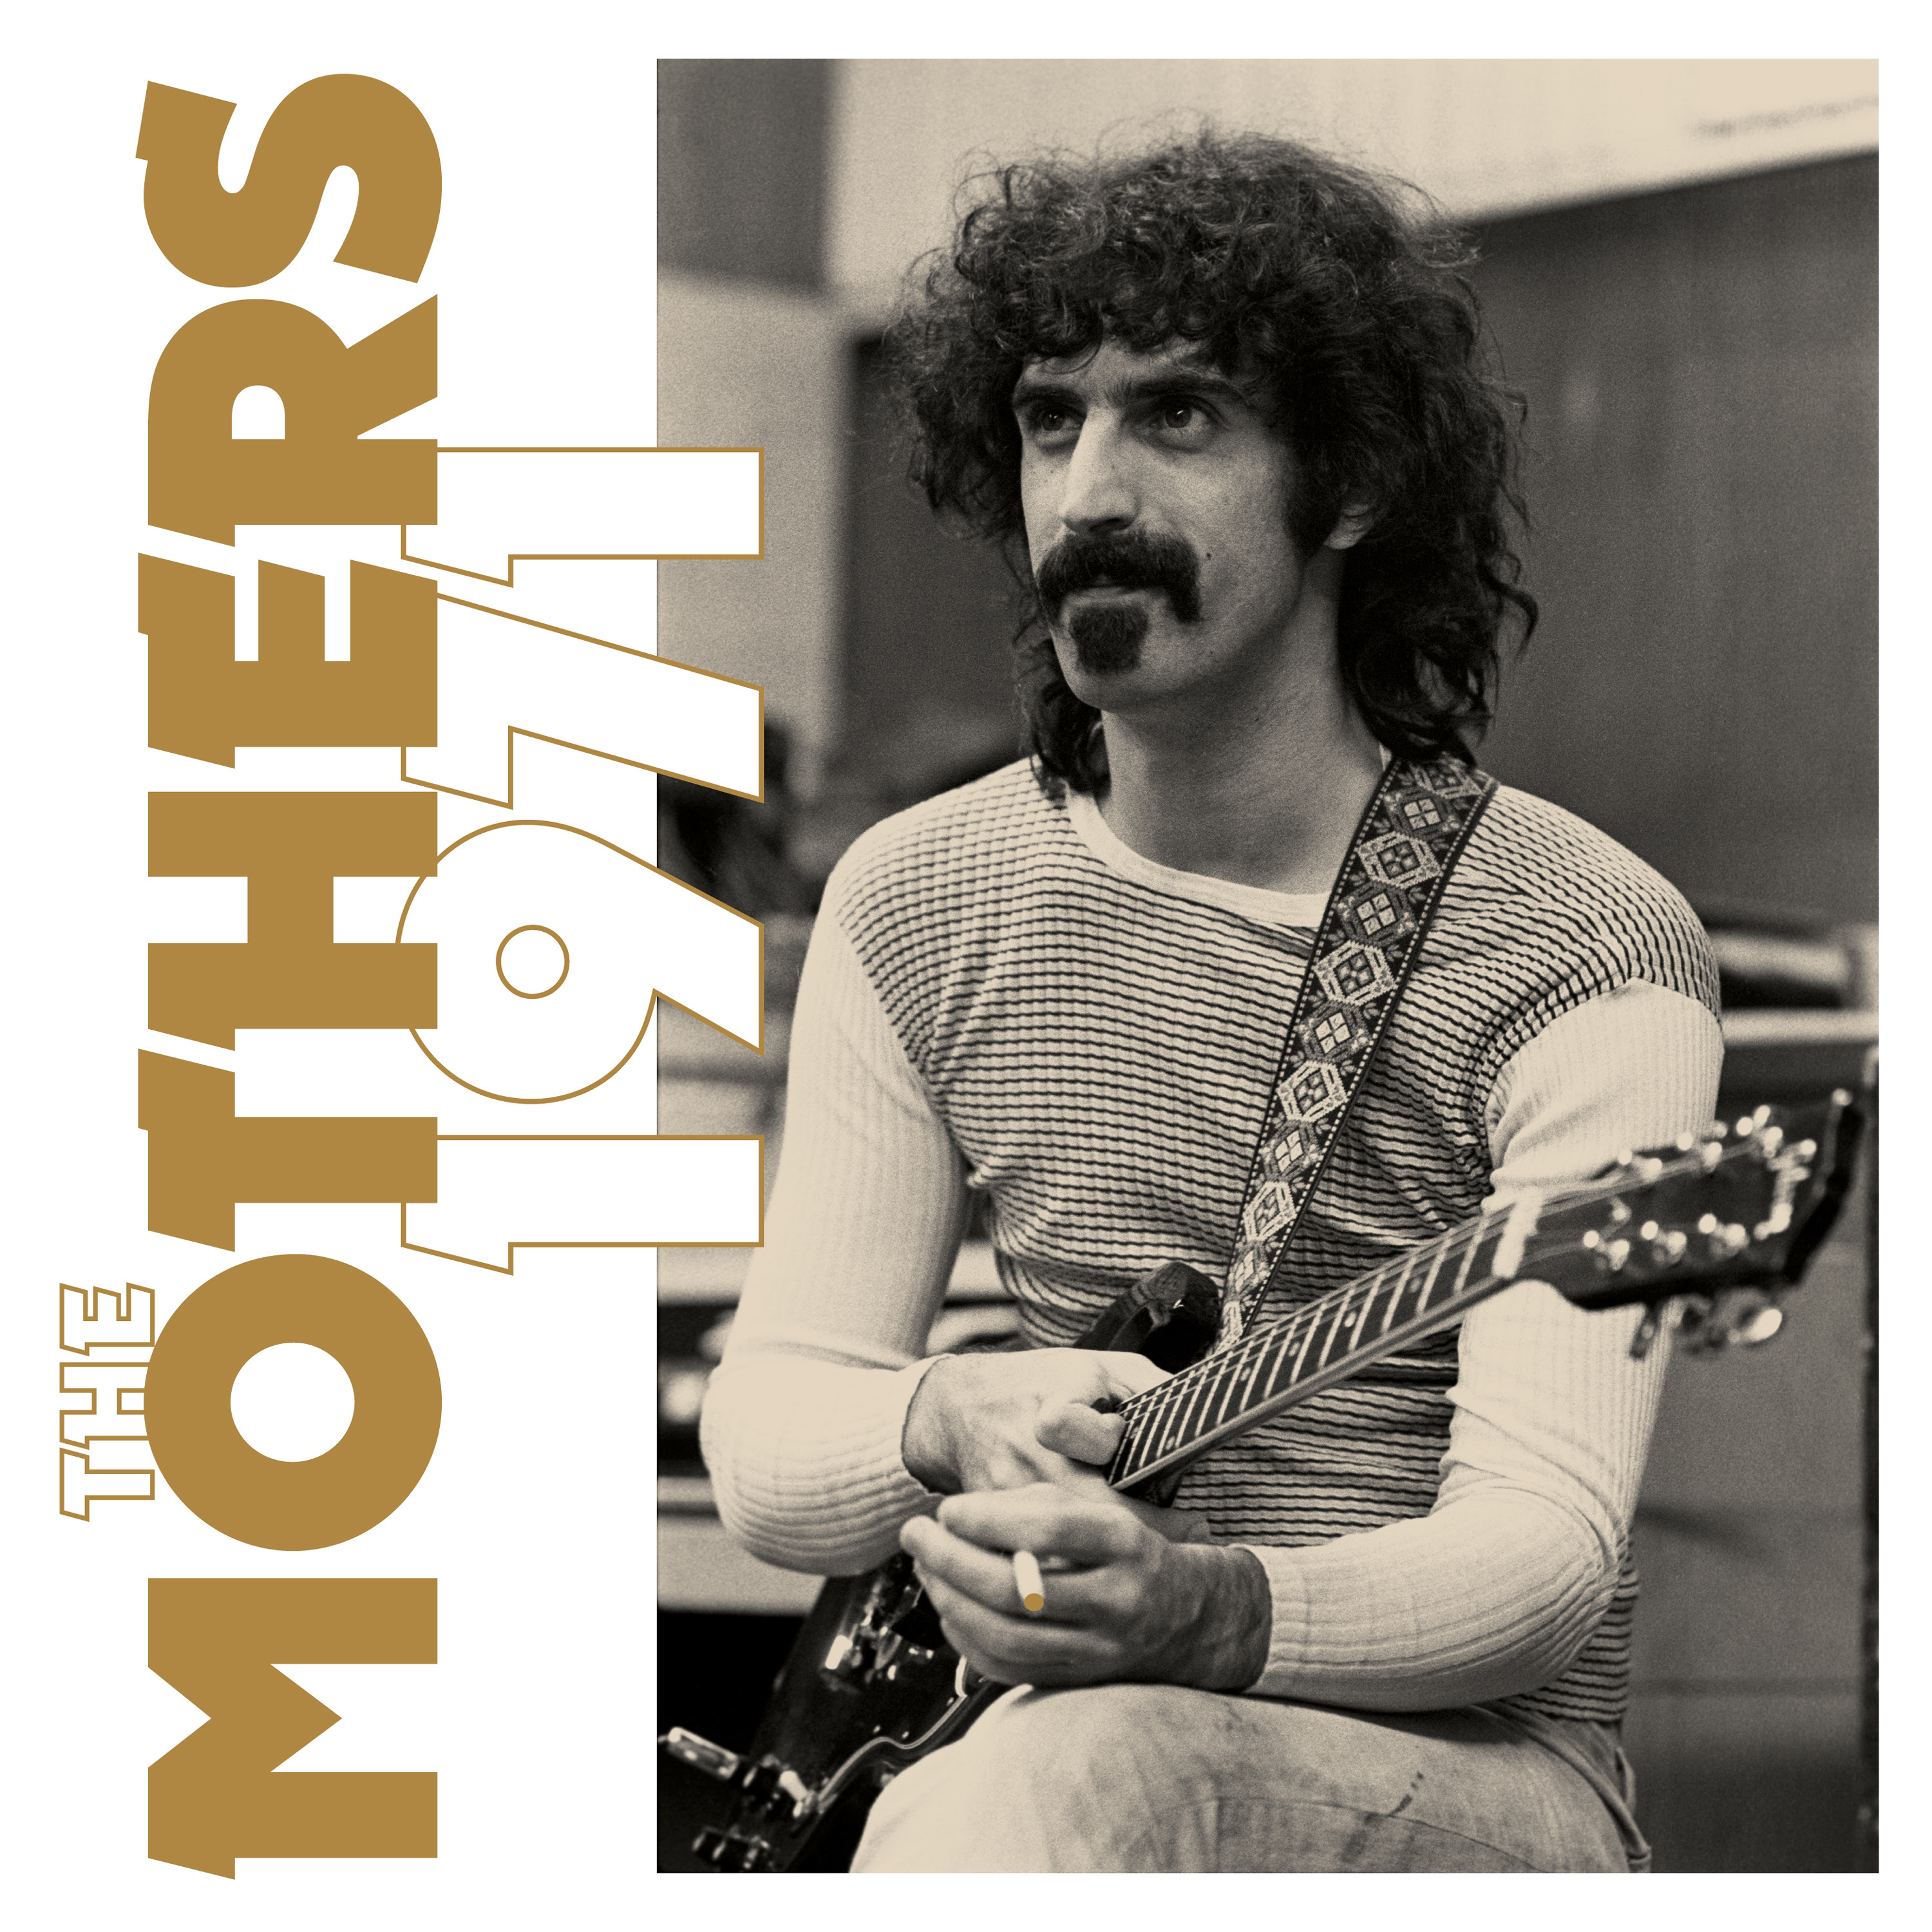 Frank Zappa's Entire Legendary 1971 Fillmore East Run and Shocking Final Rainbow Theatre Gig Collected Together On New 8-Disc Boxed Set, "The Mothers 1971," Out Now